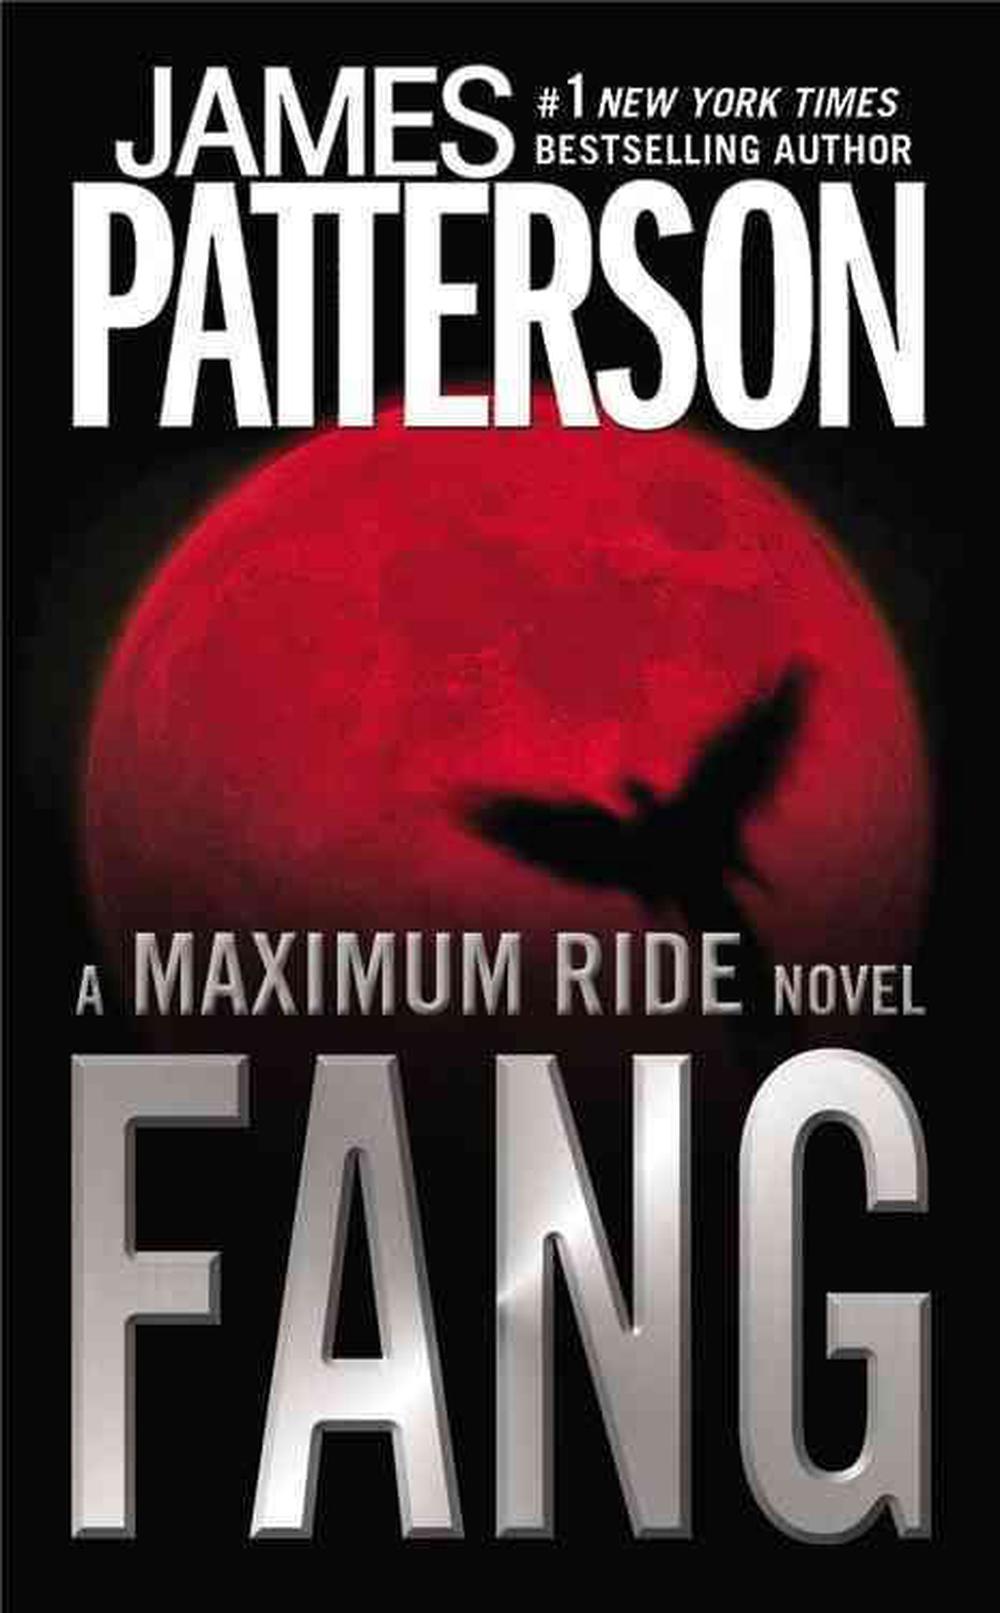 james patterson printable book list by series